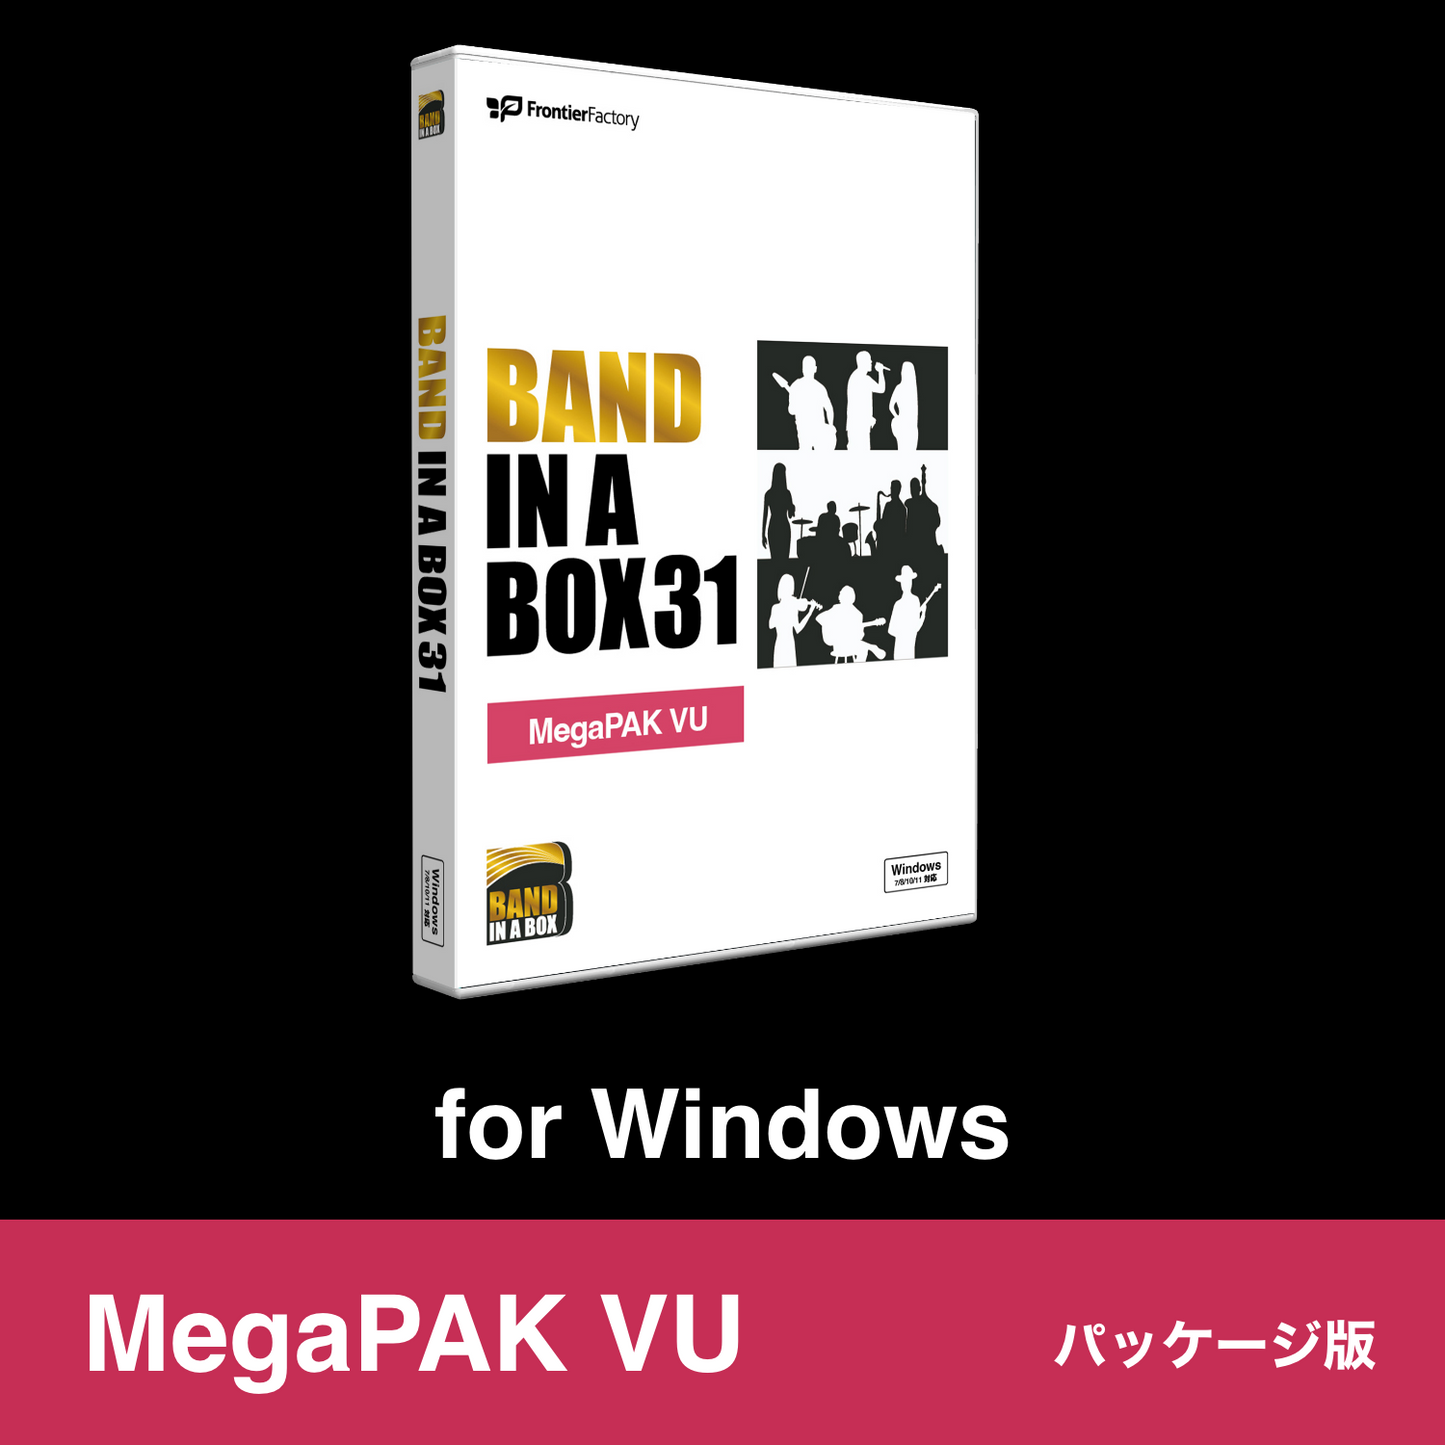 Band-in-a-Box 31 for Win バージョンアップ【パッケージ版】